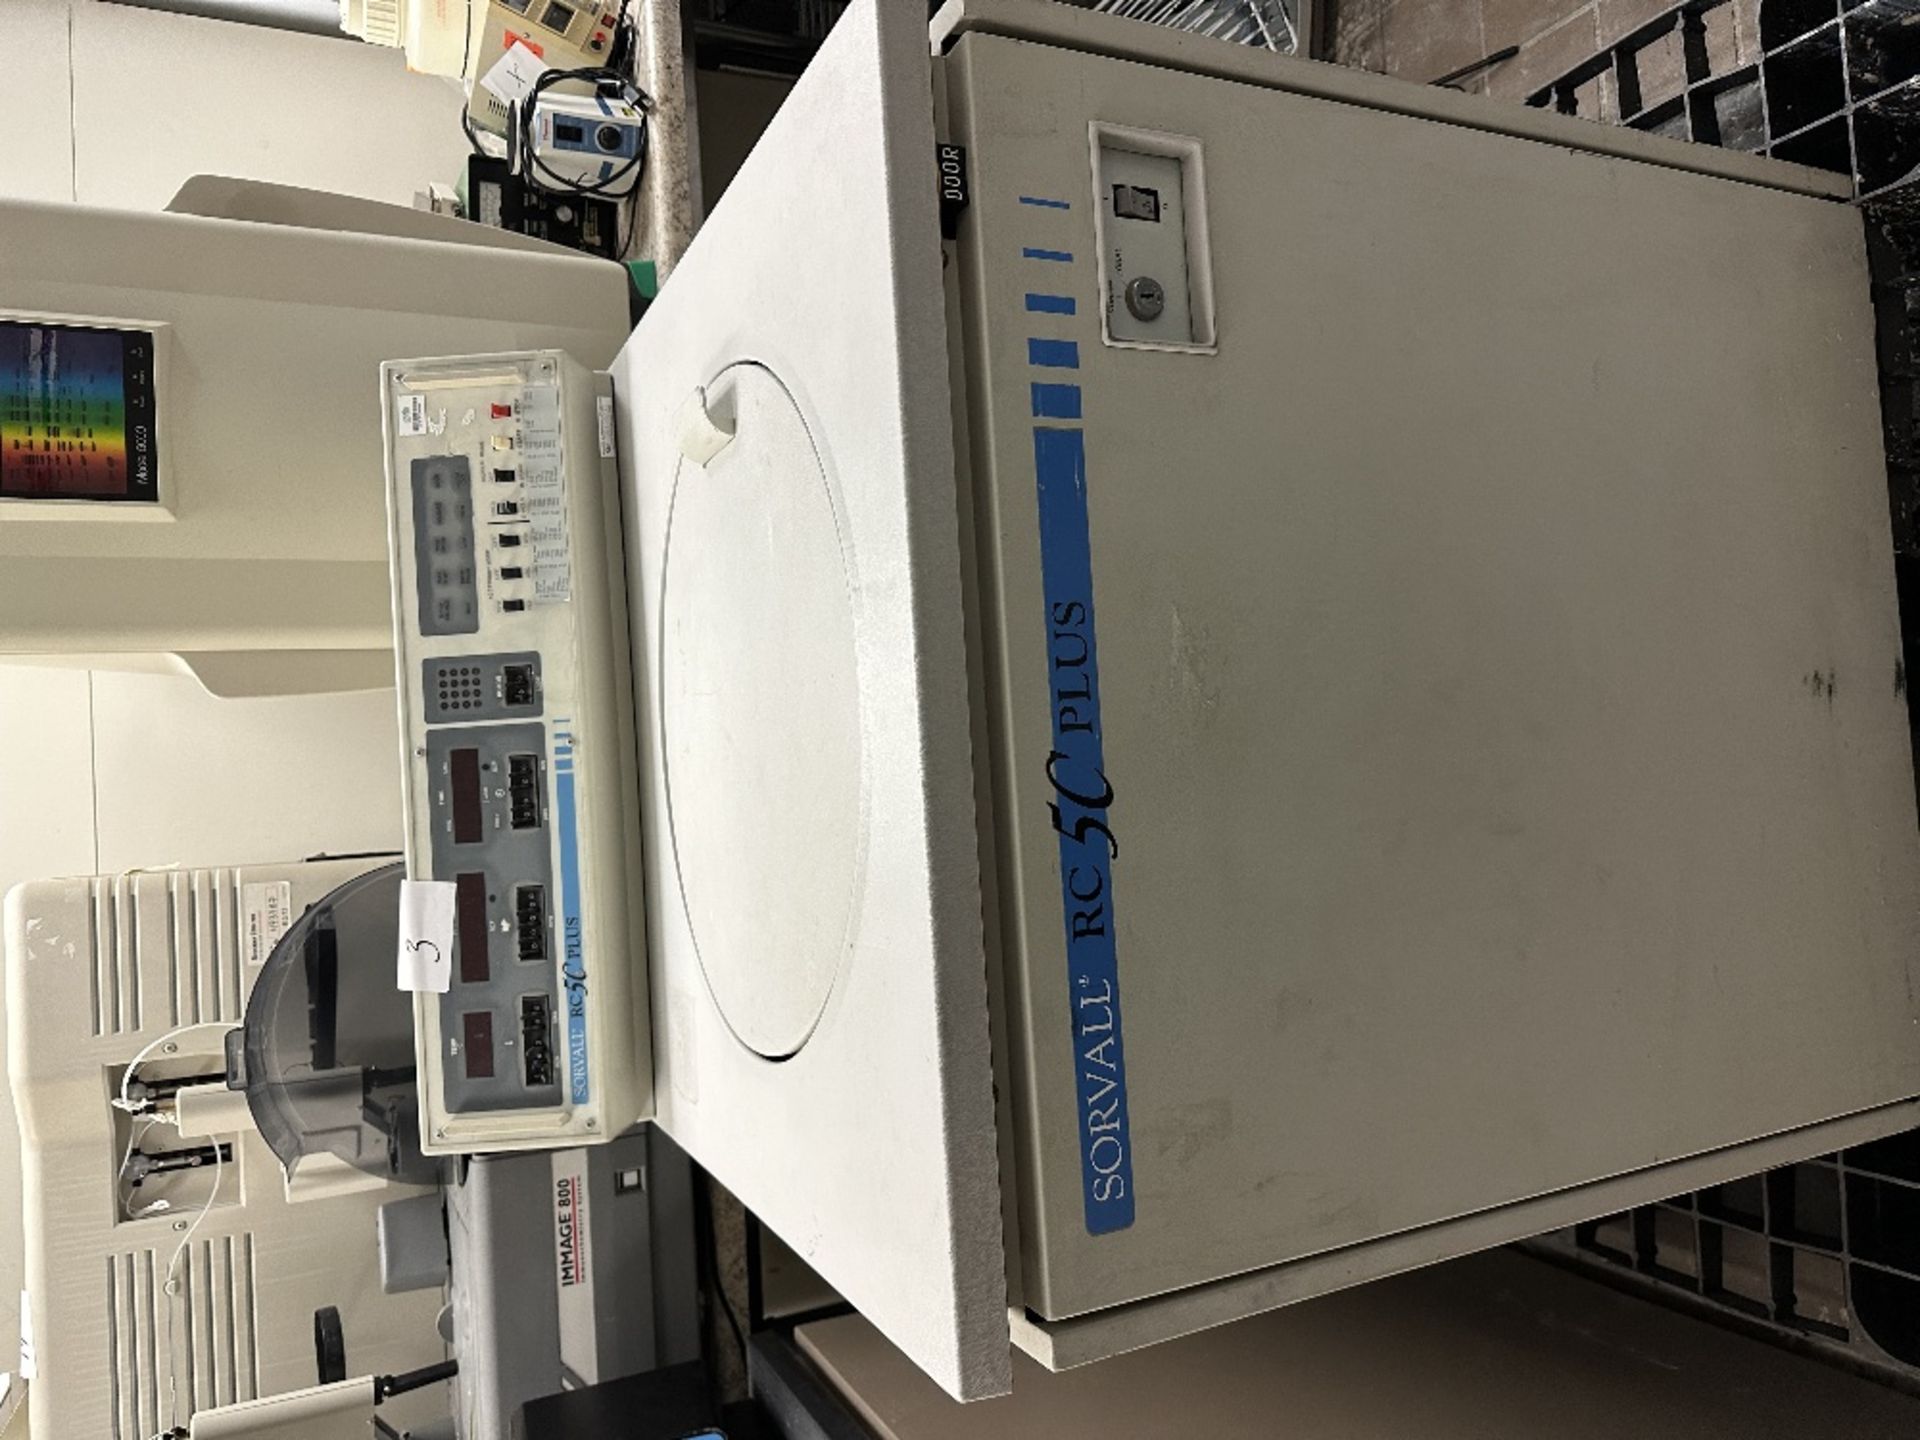 Meso Scale Discovery MSD 1200 Sector Imager (LOCATED IN MIDDLETOWN, N.Y.)-FOR PACKAGING & SHIPPING - Image 8 of 8